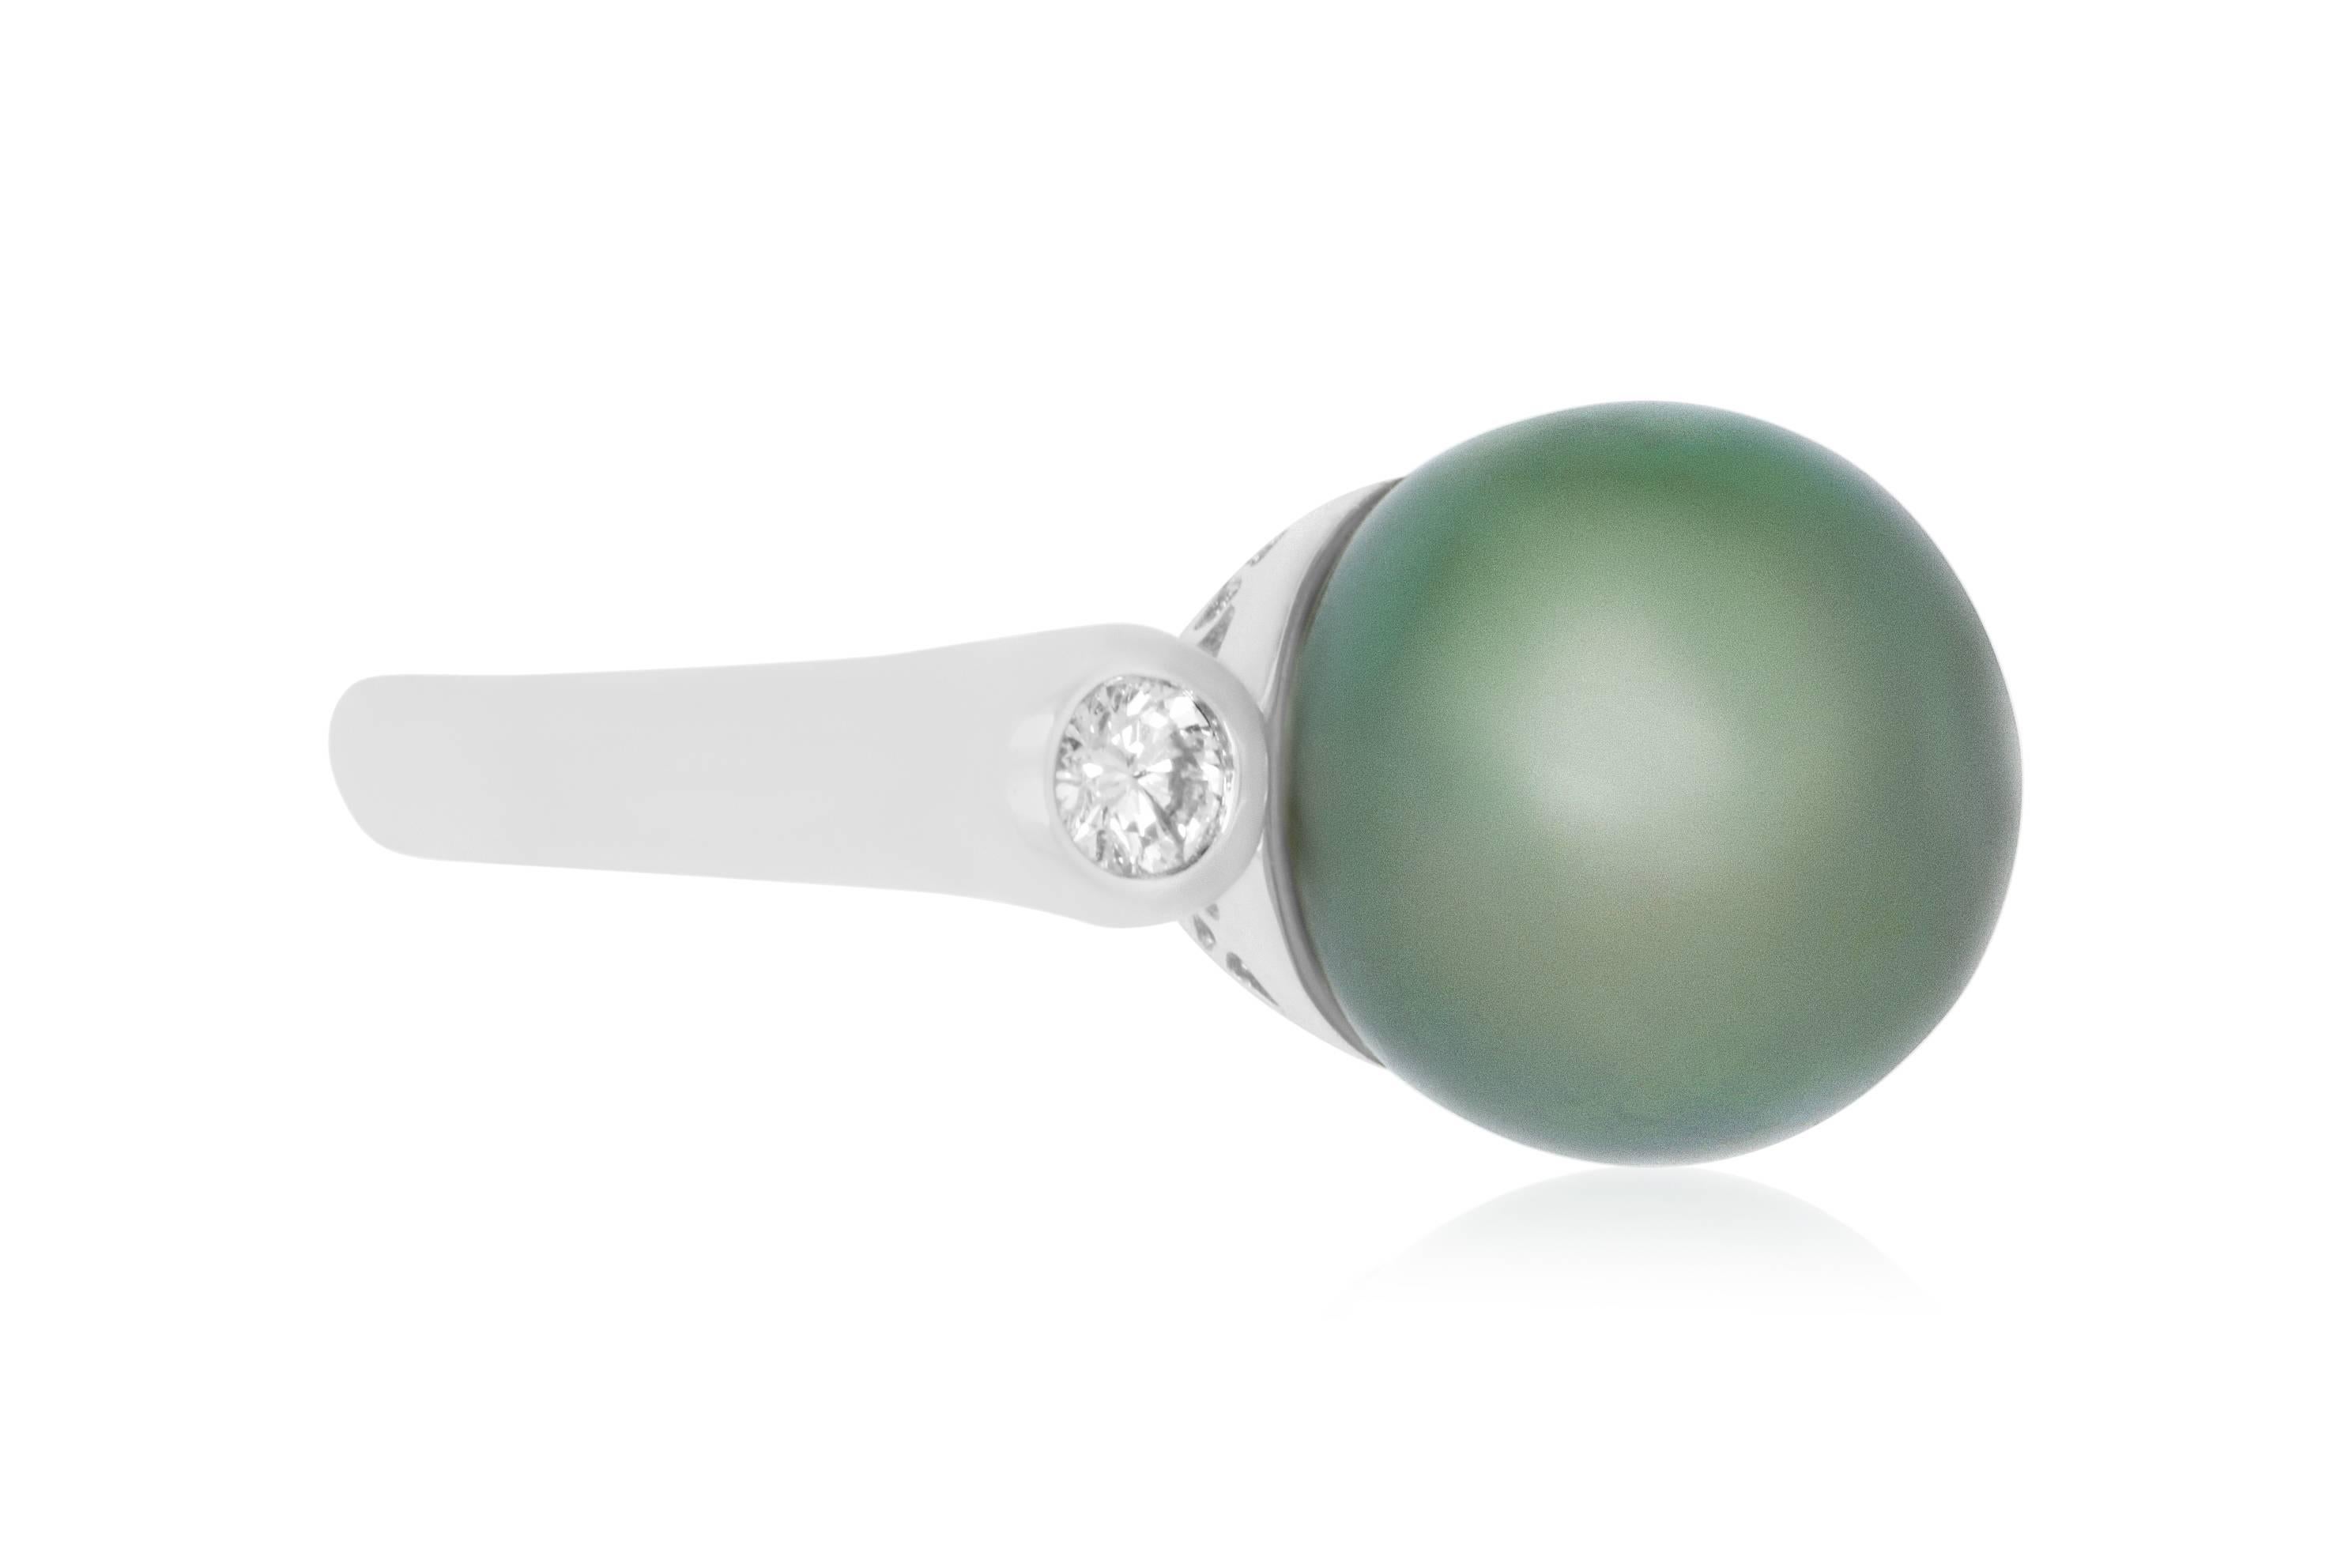 Material: 18k White Gold 
Center Stone Details: 3.26 Carat Tahitian South Sea Pearl 13.2MM
Mounting Diamond Details: Brilliant Round White Diamonds Approximately 0.33 Carats - Clarity: VS-SI / Color: H-I
Ring Size: Size 6.5. Alberto offers